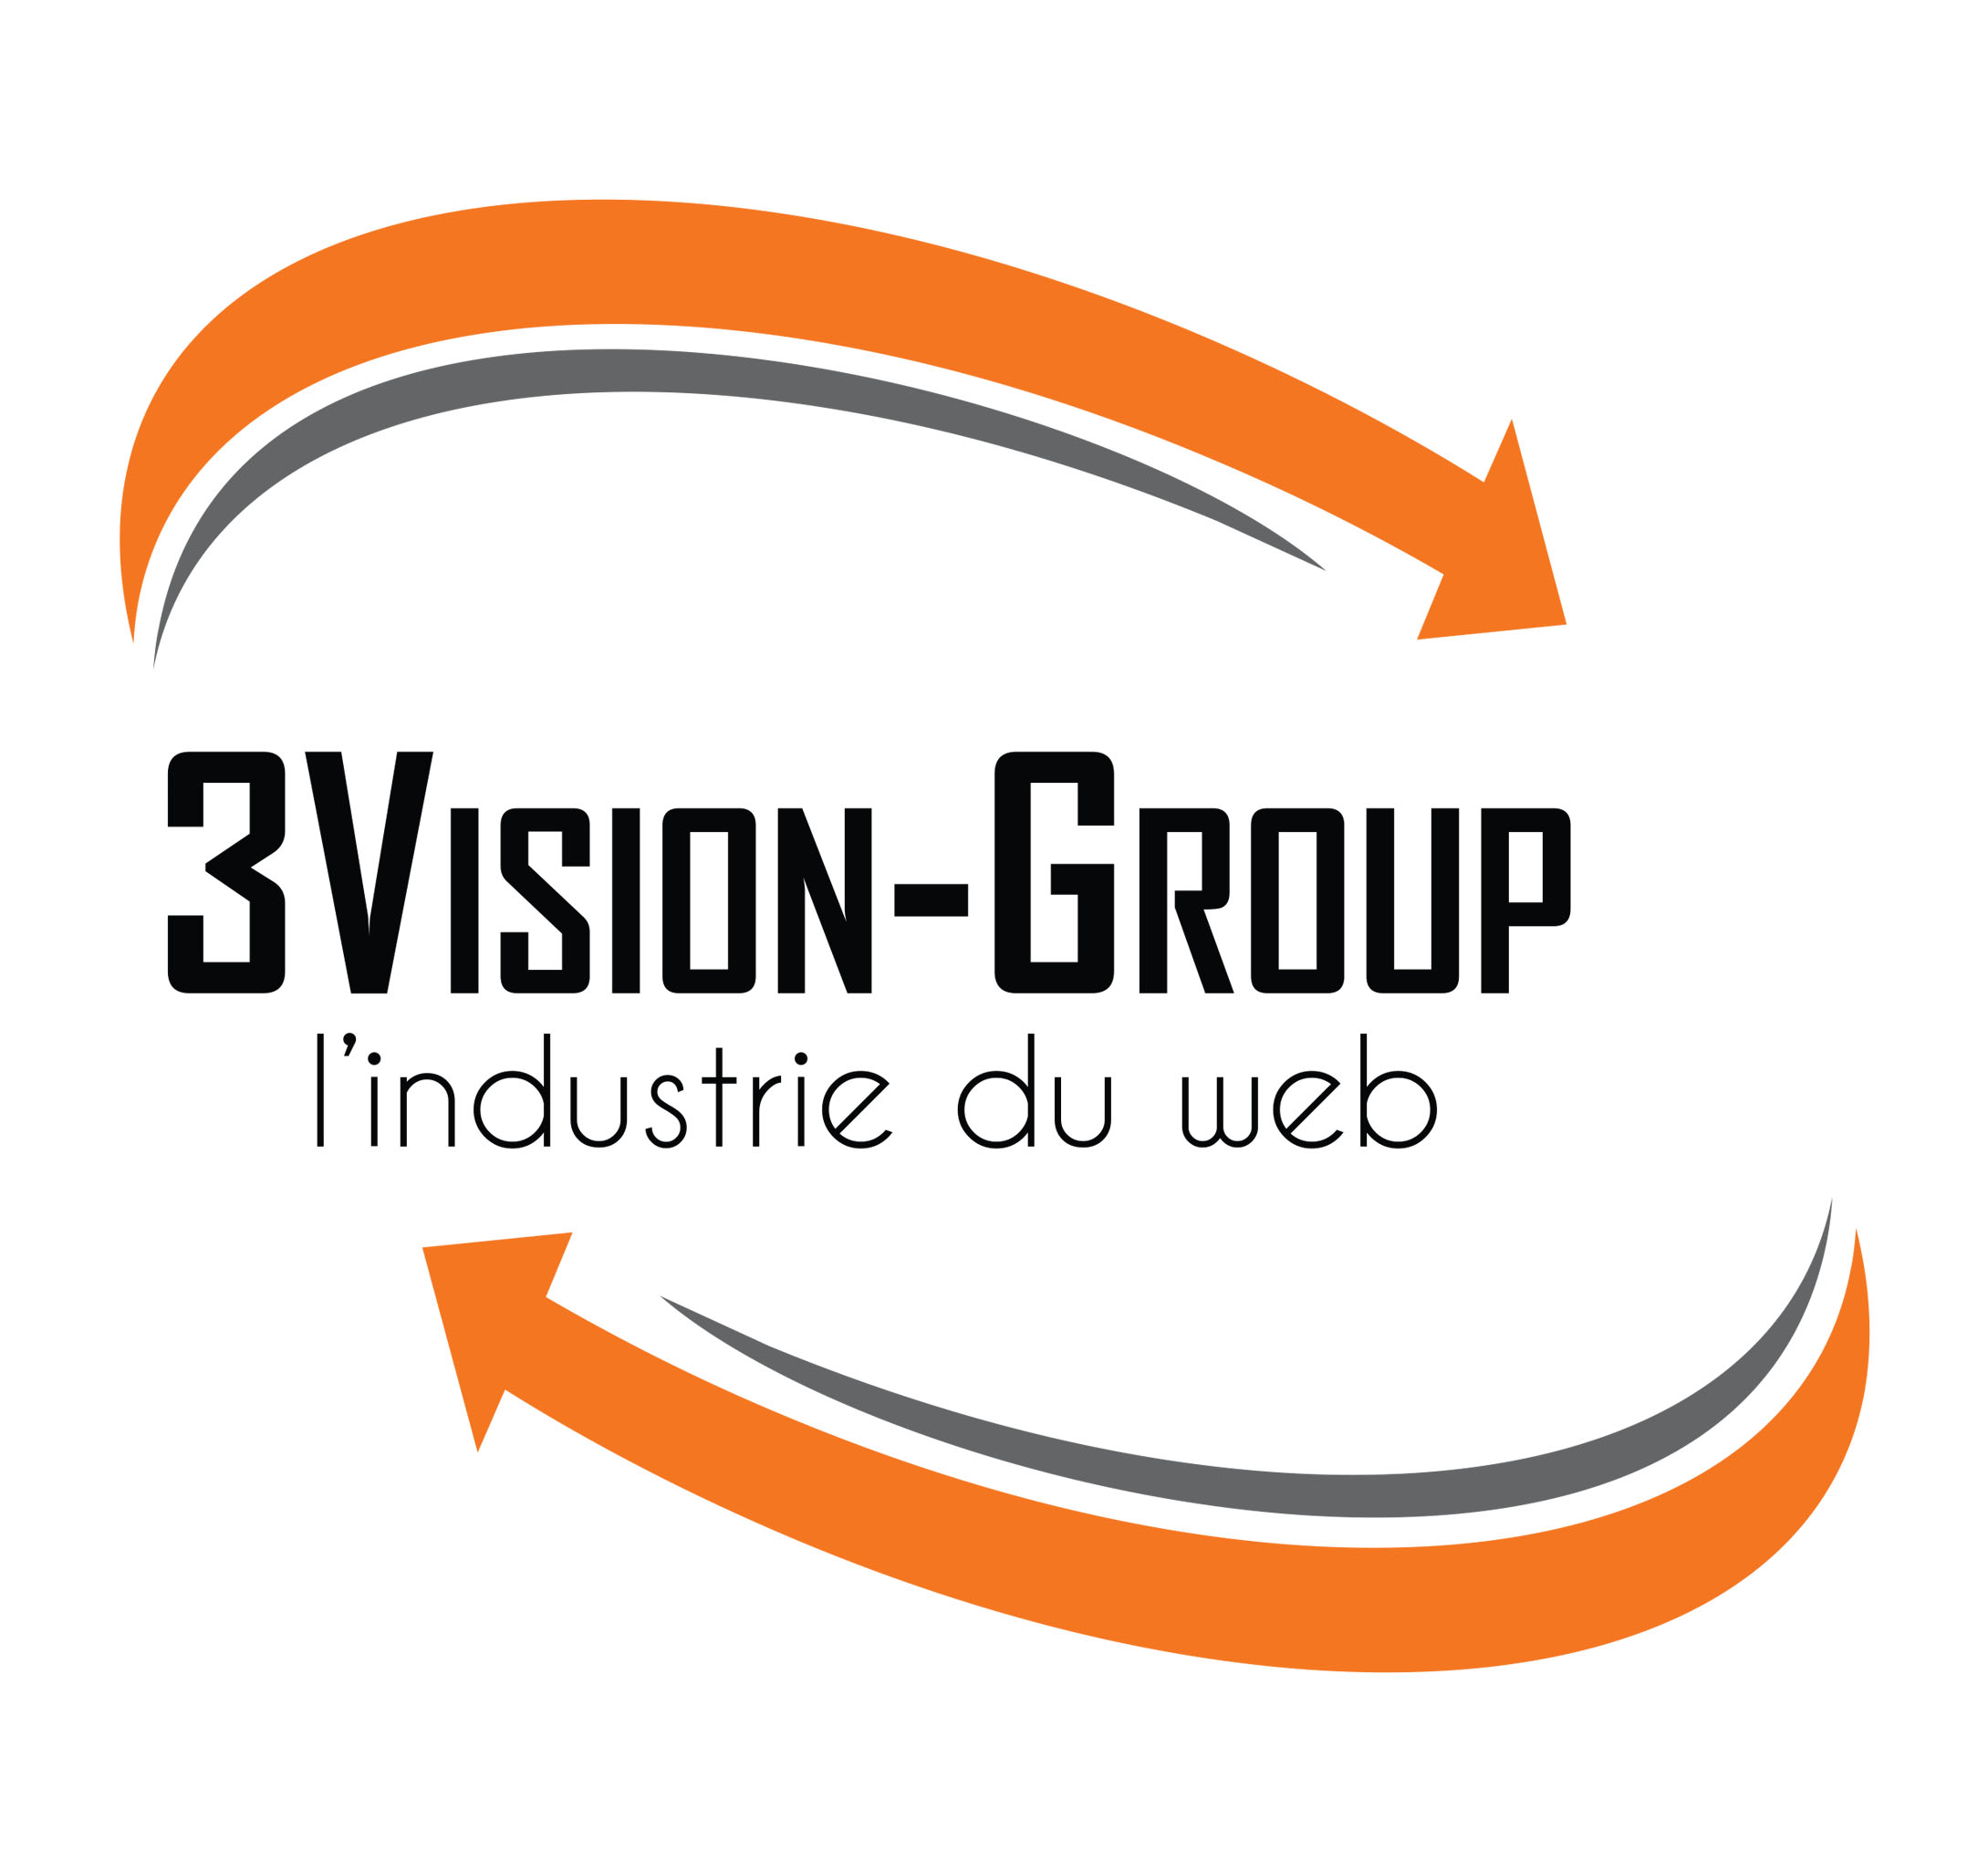 3vision-group